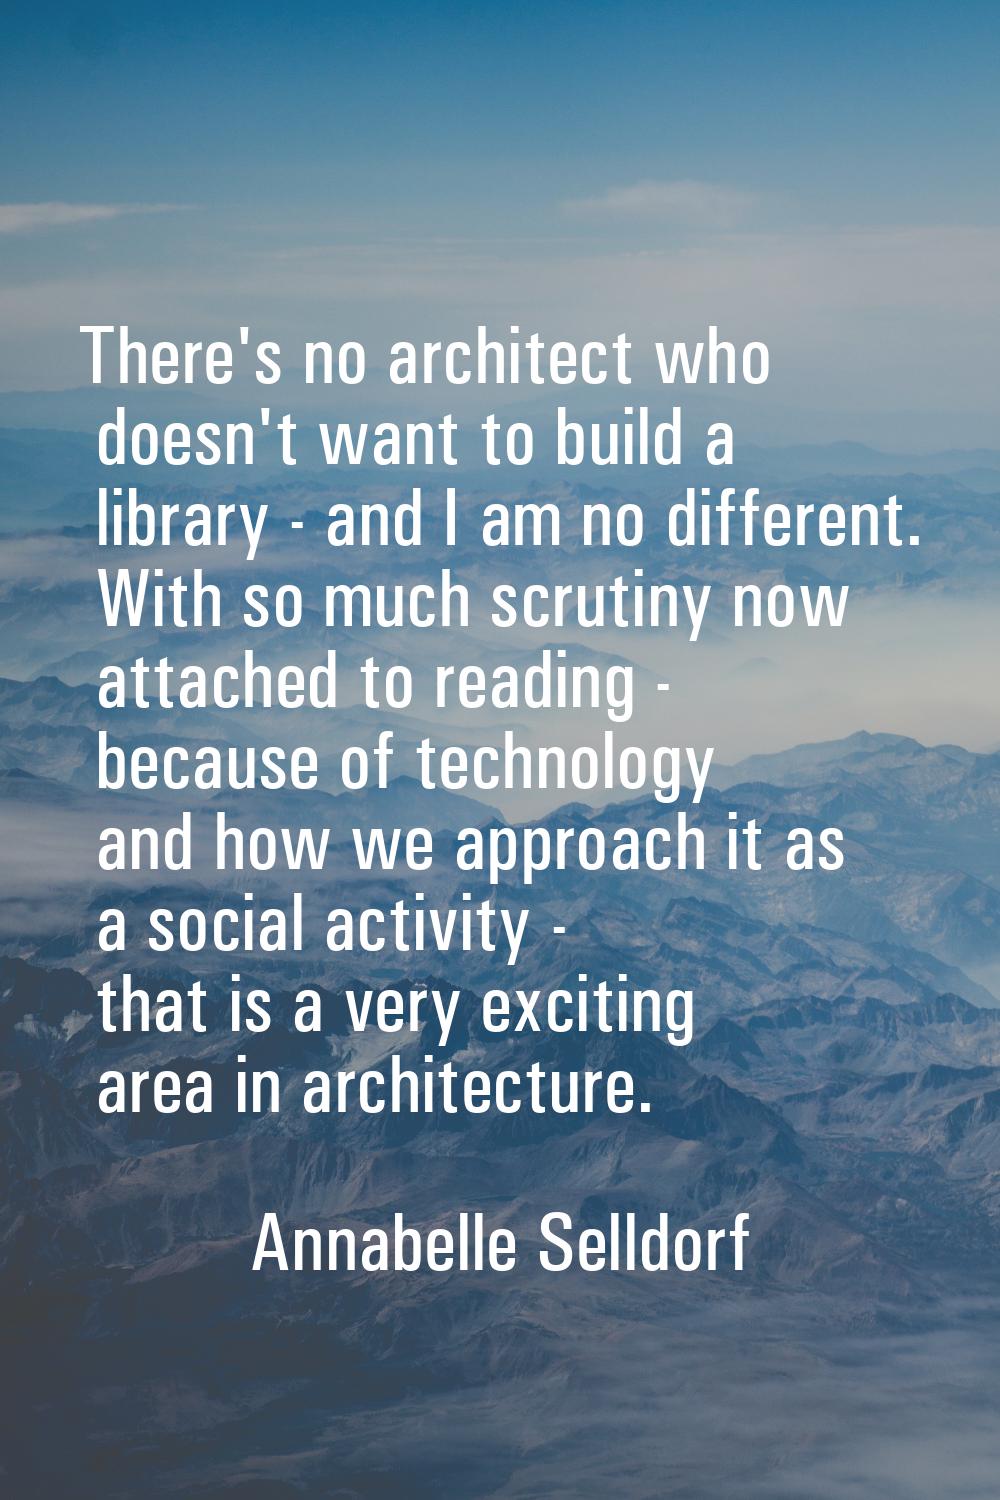 There's no architect who doesn't want to build a library - and I am no different. With so much scru